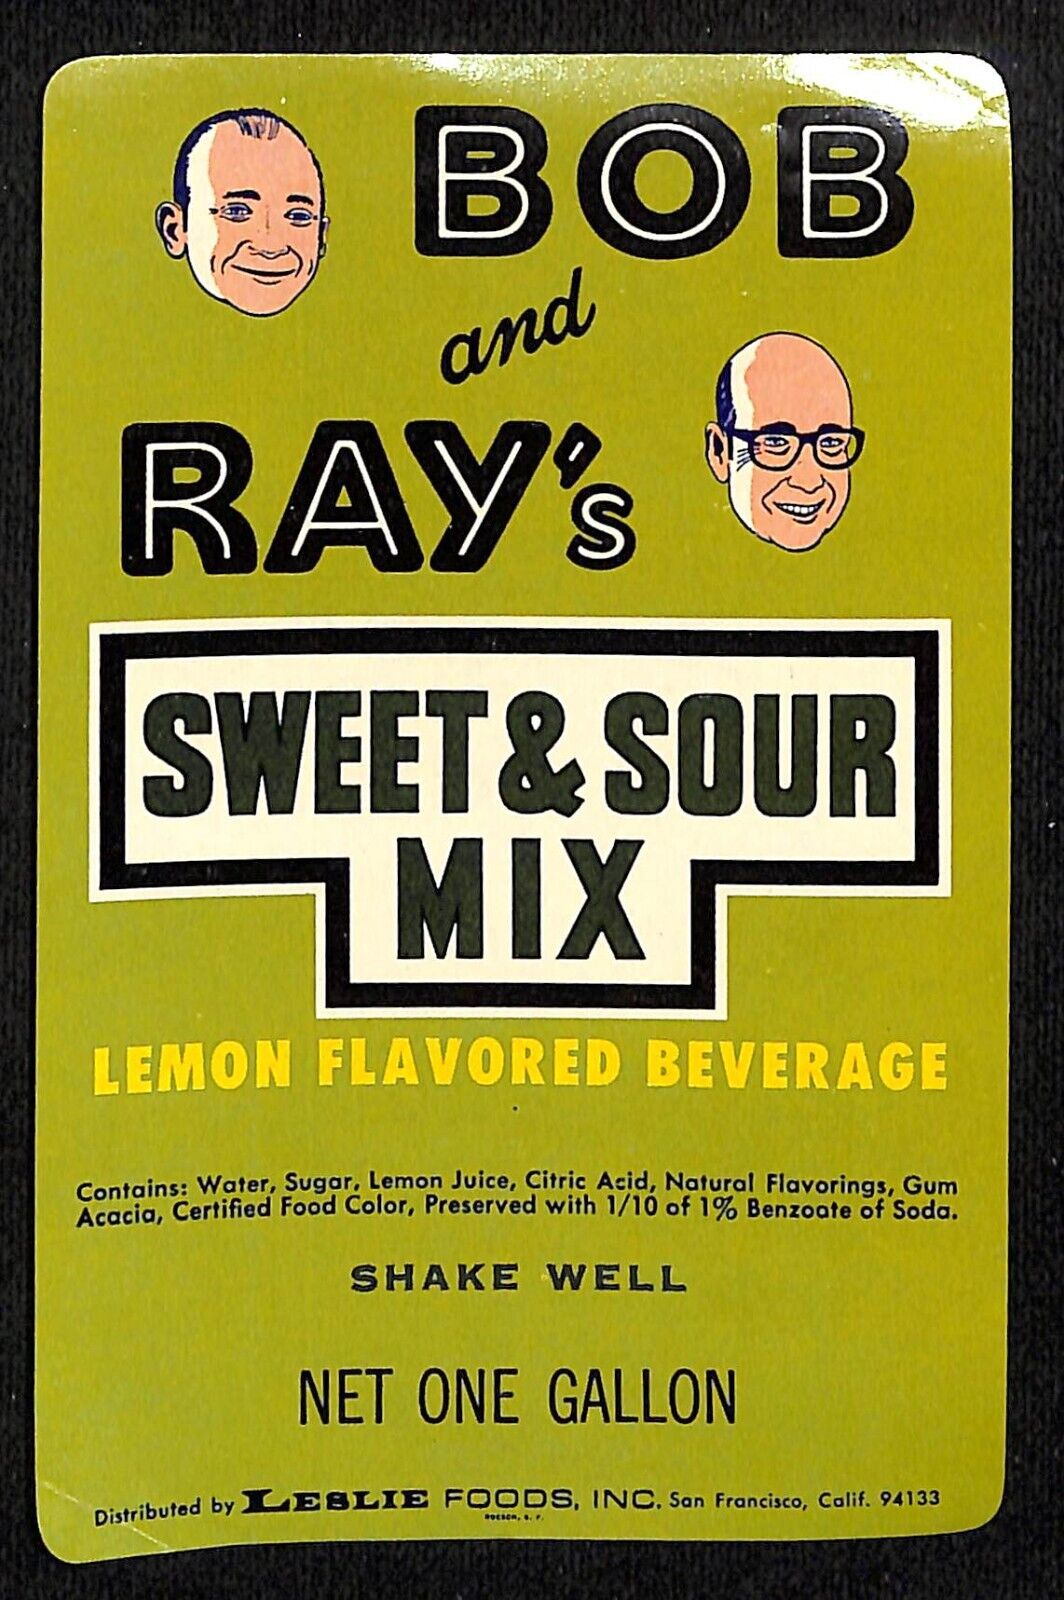 Bob and Ray Sweet & Sour Mix Paper Soda Label Leslie Foods c1965-70 Scarce